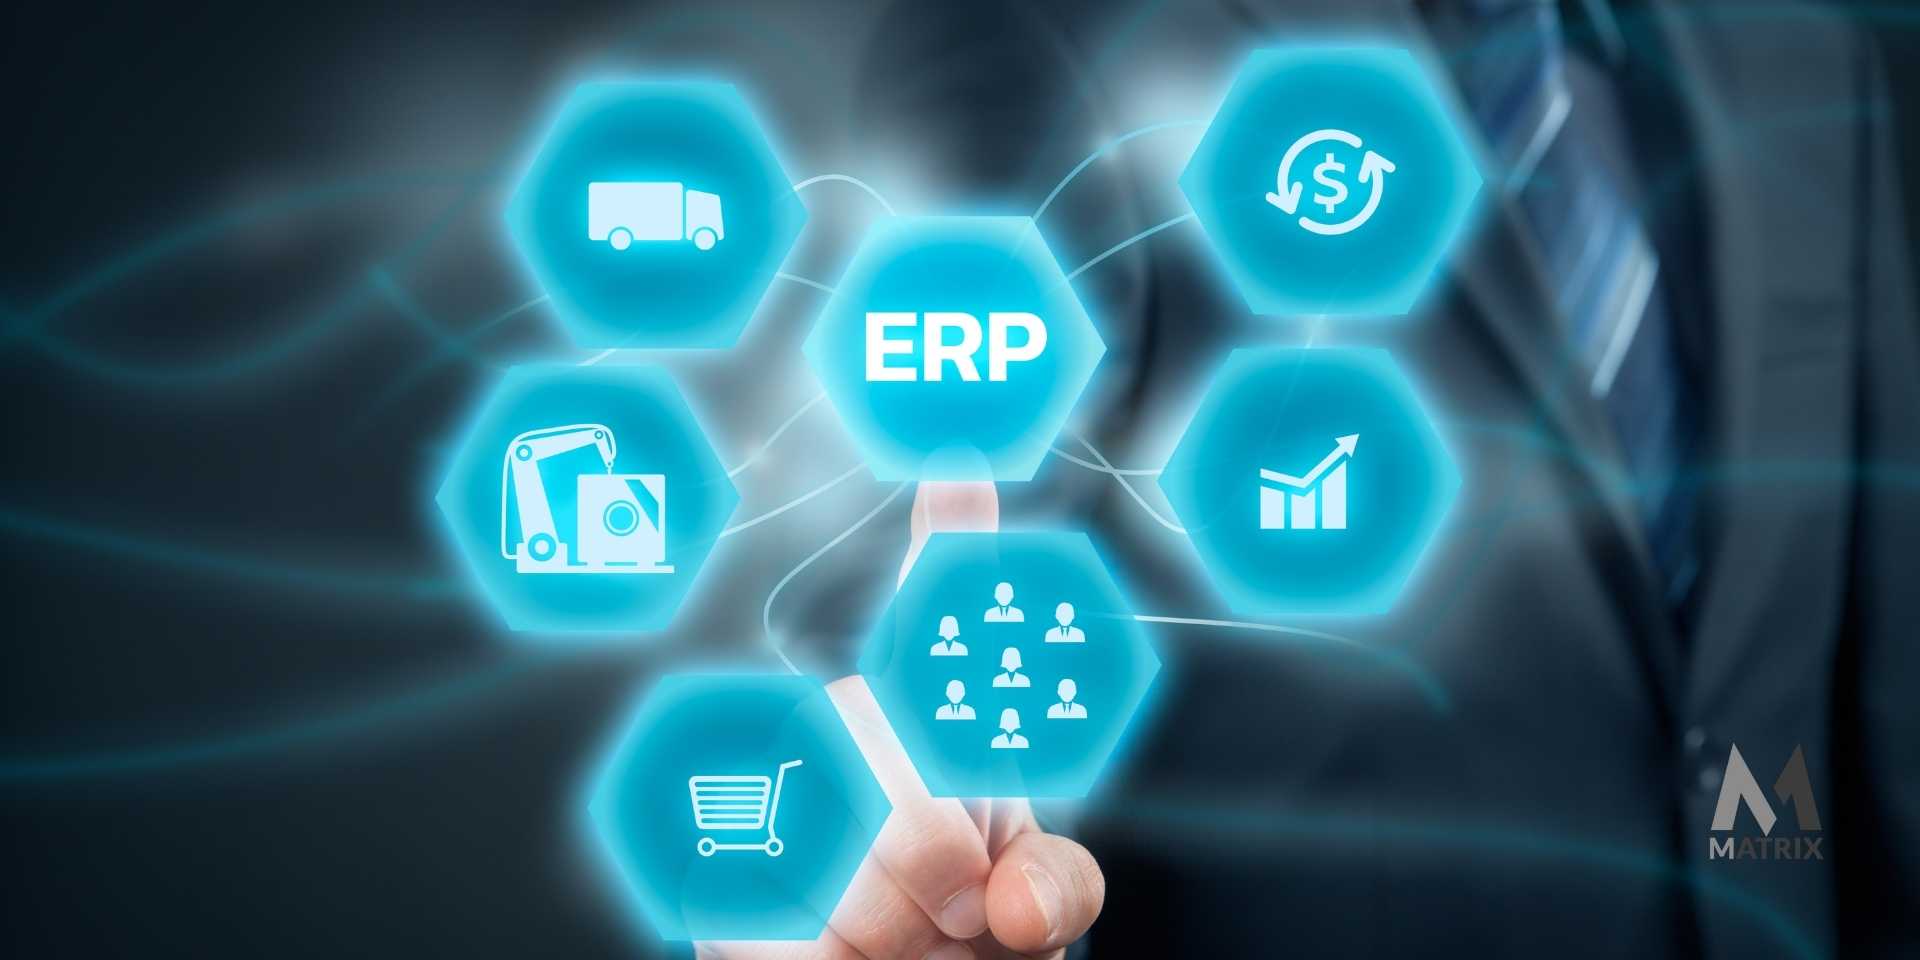 What ERP software